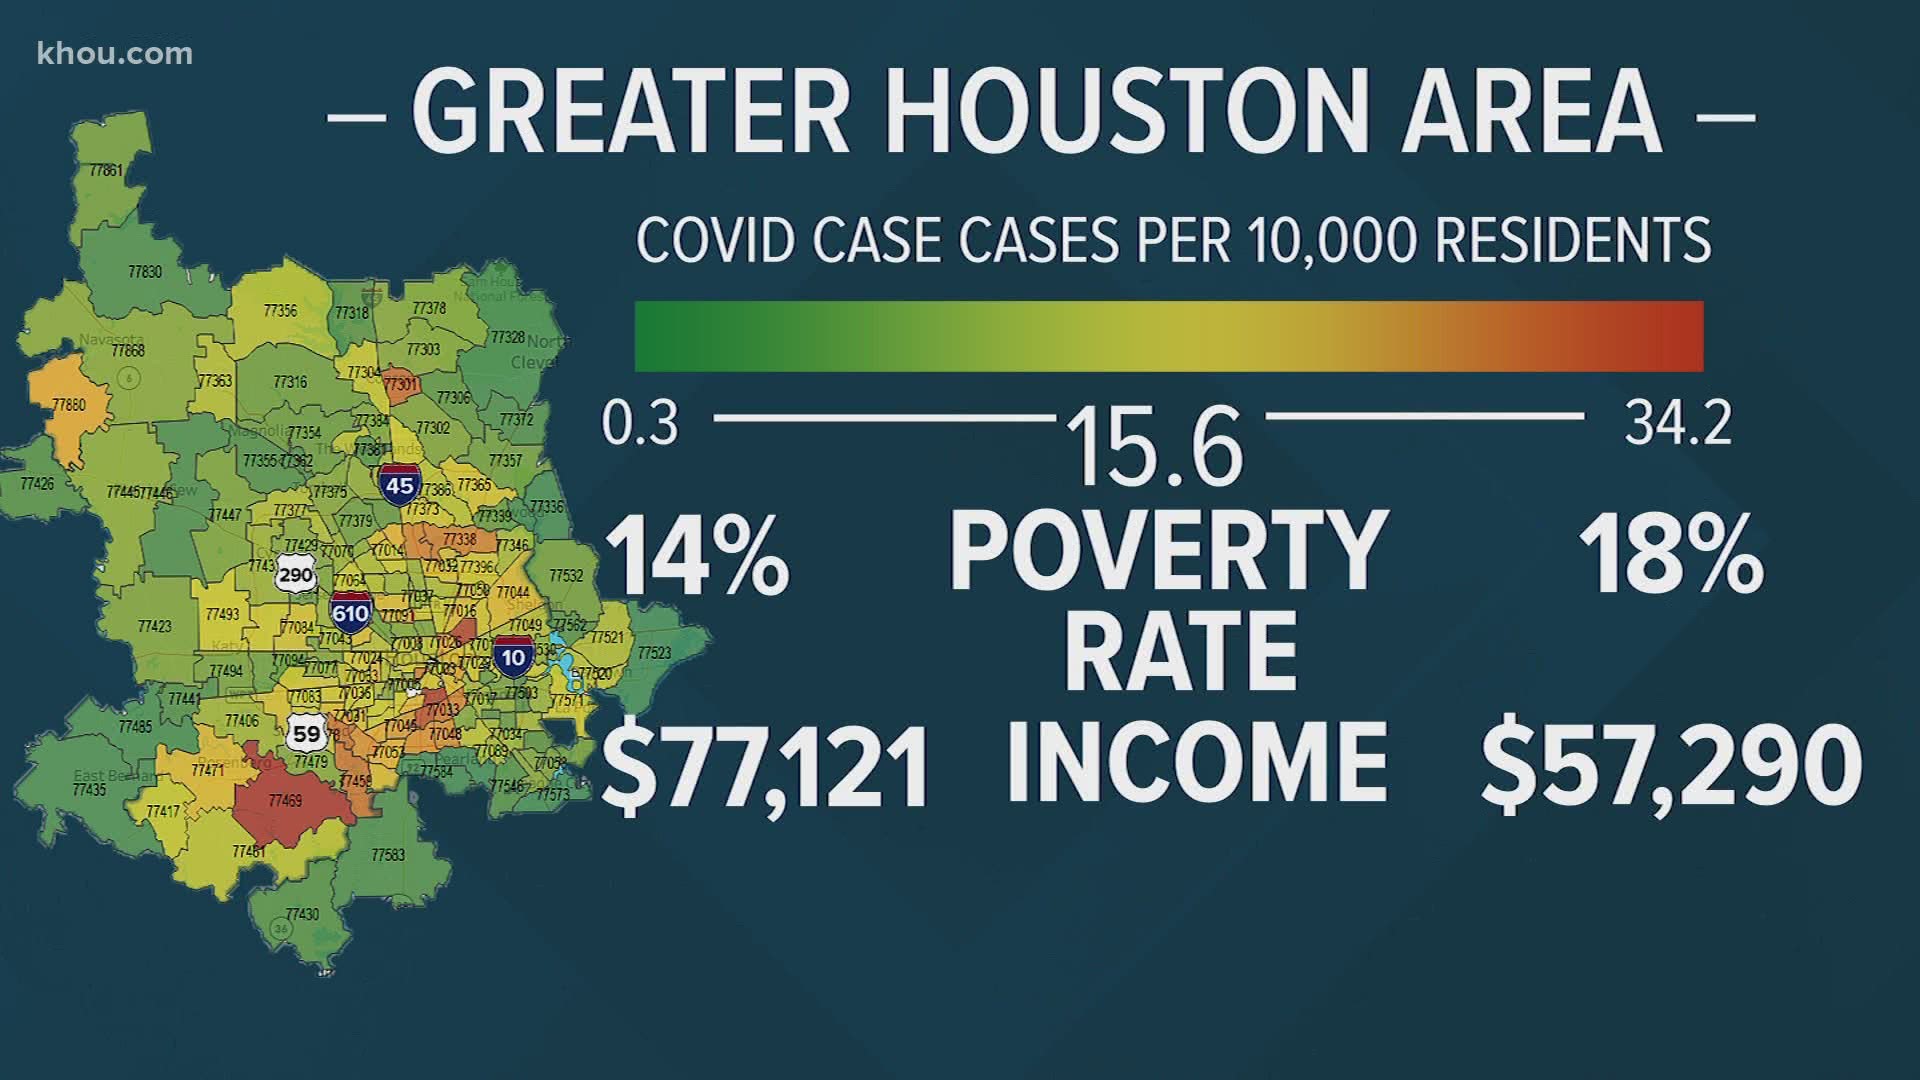 Data reveal a link that’s hard to ignore between race, poverty and testing positive for coronavirus in the Greater Houston area.